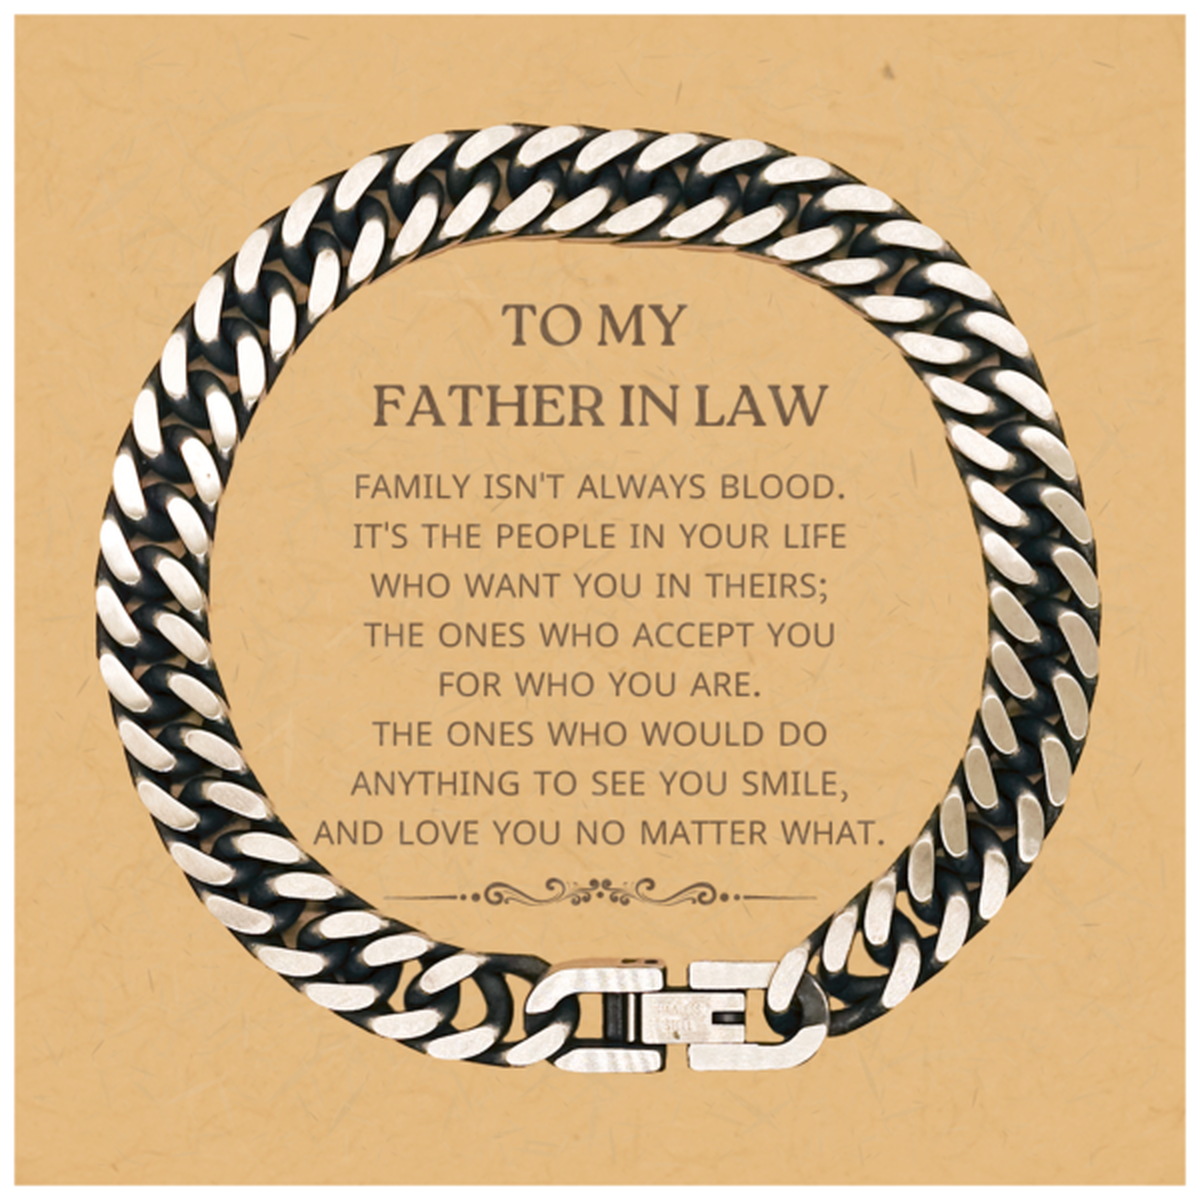 To My Father In Law Gifts, Family isn't always blood, Father In Law Cuban Link Chain Bracelet, Birthday Christmas Unique Present For Father In Law